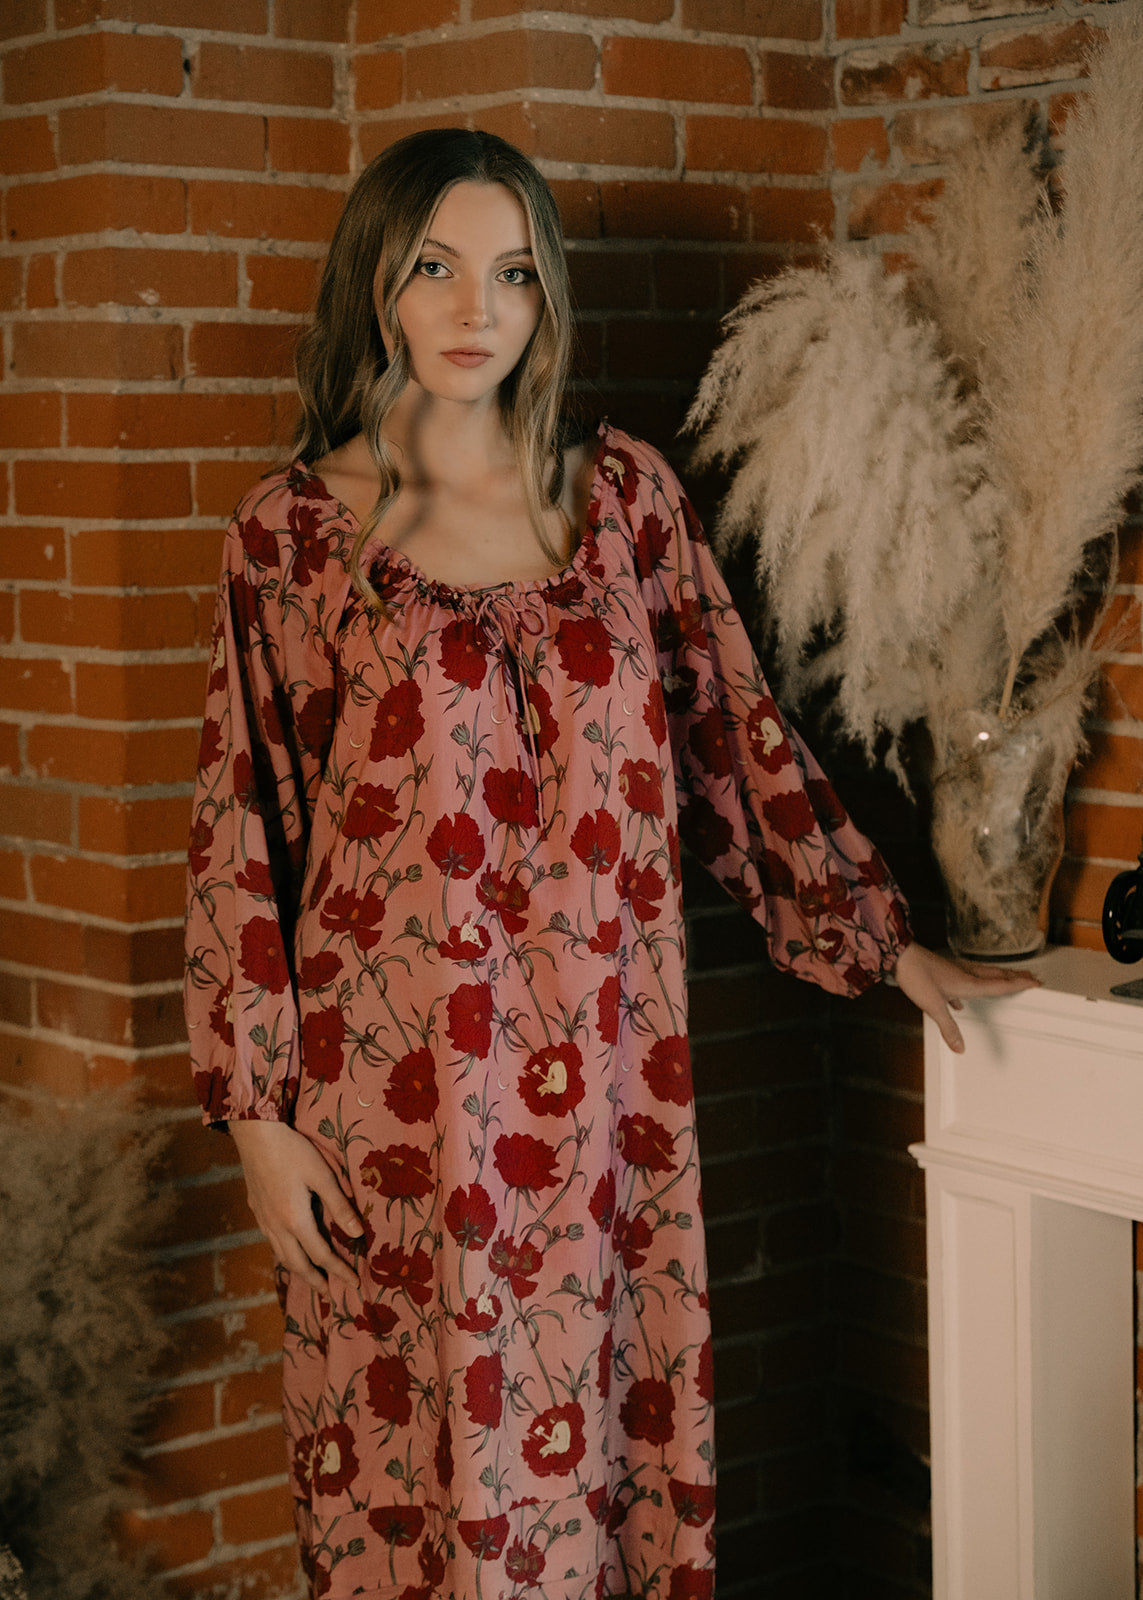 Till Blush Of Night luxury loungewear / pyjama nightgown style made out of lightweight Tencel eco-friendly fabric in pink and red colorway 